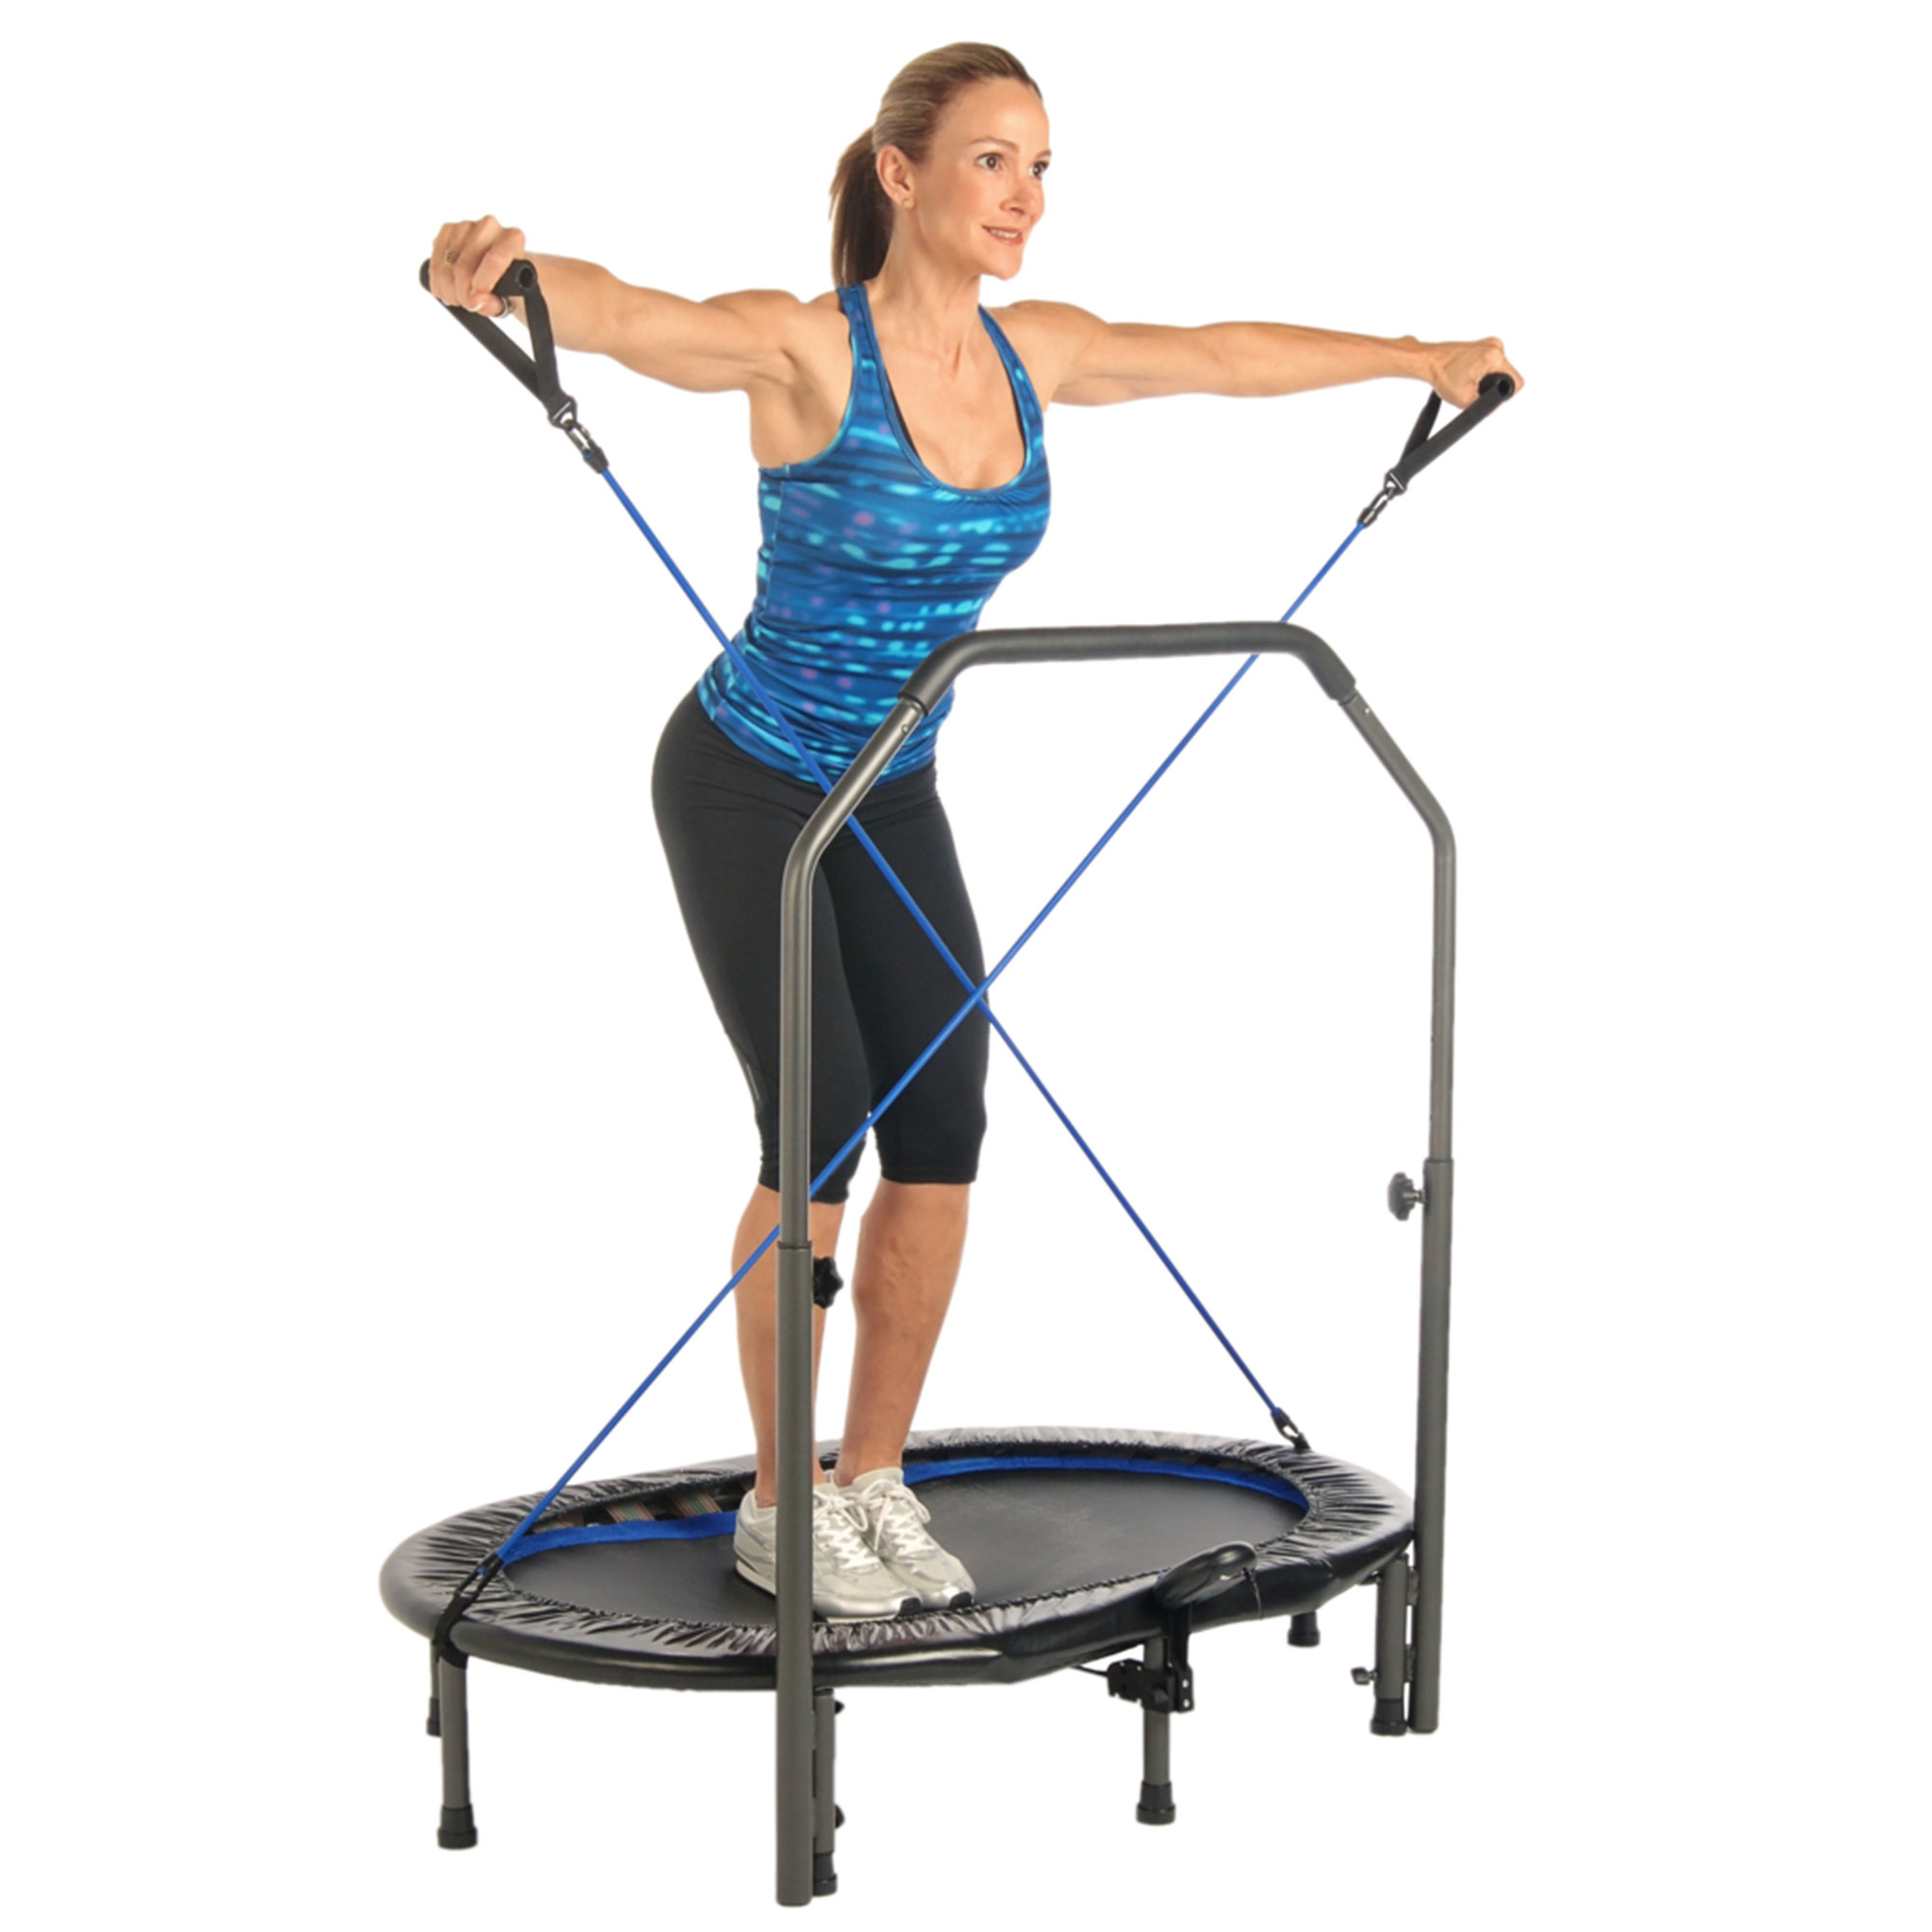 Stamina InTone Oval Fitness Rebounder Trampoline with Handlebars, White - image 2 of 8